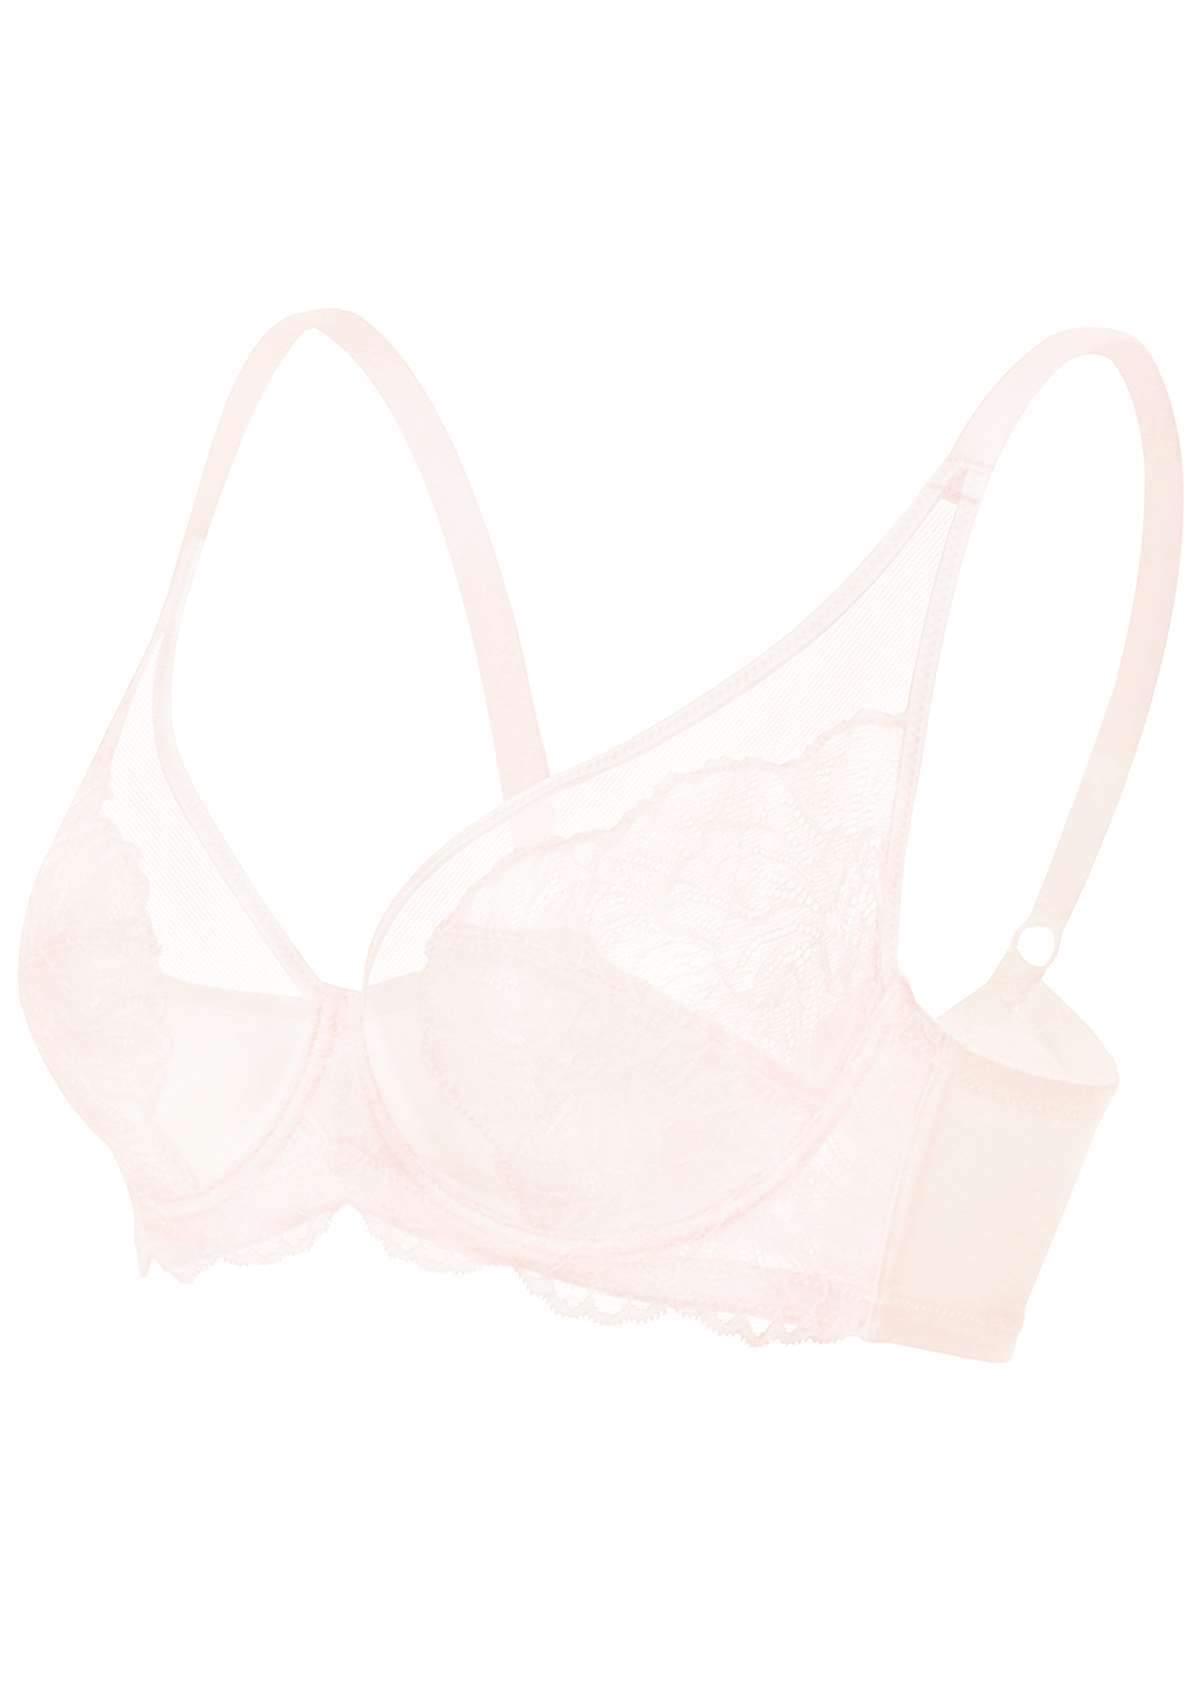 HSIA Blossom Sheer Lace Bra: Comfortable Underwire Bra For Big Busts - White / 40 / C